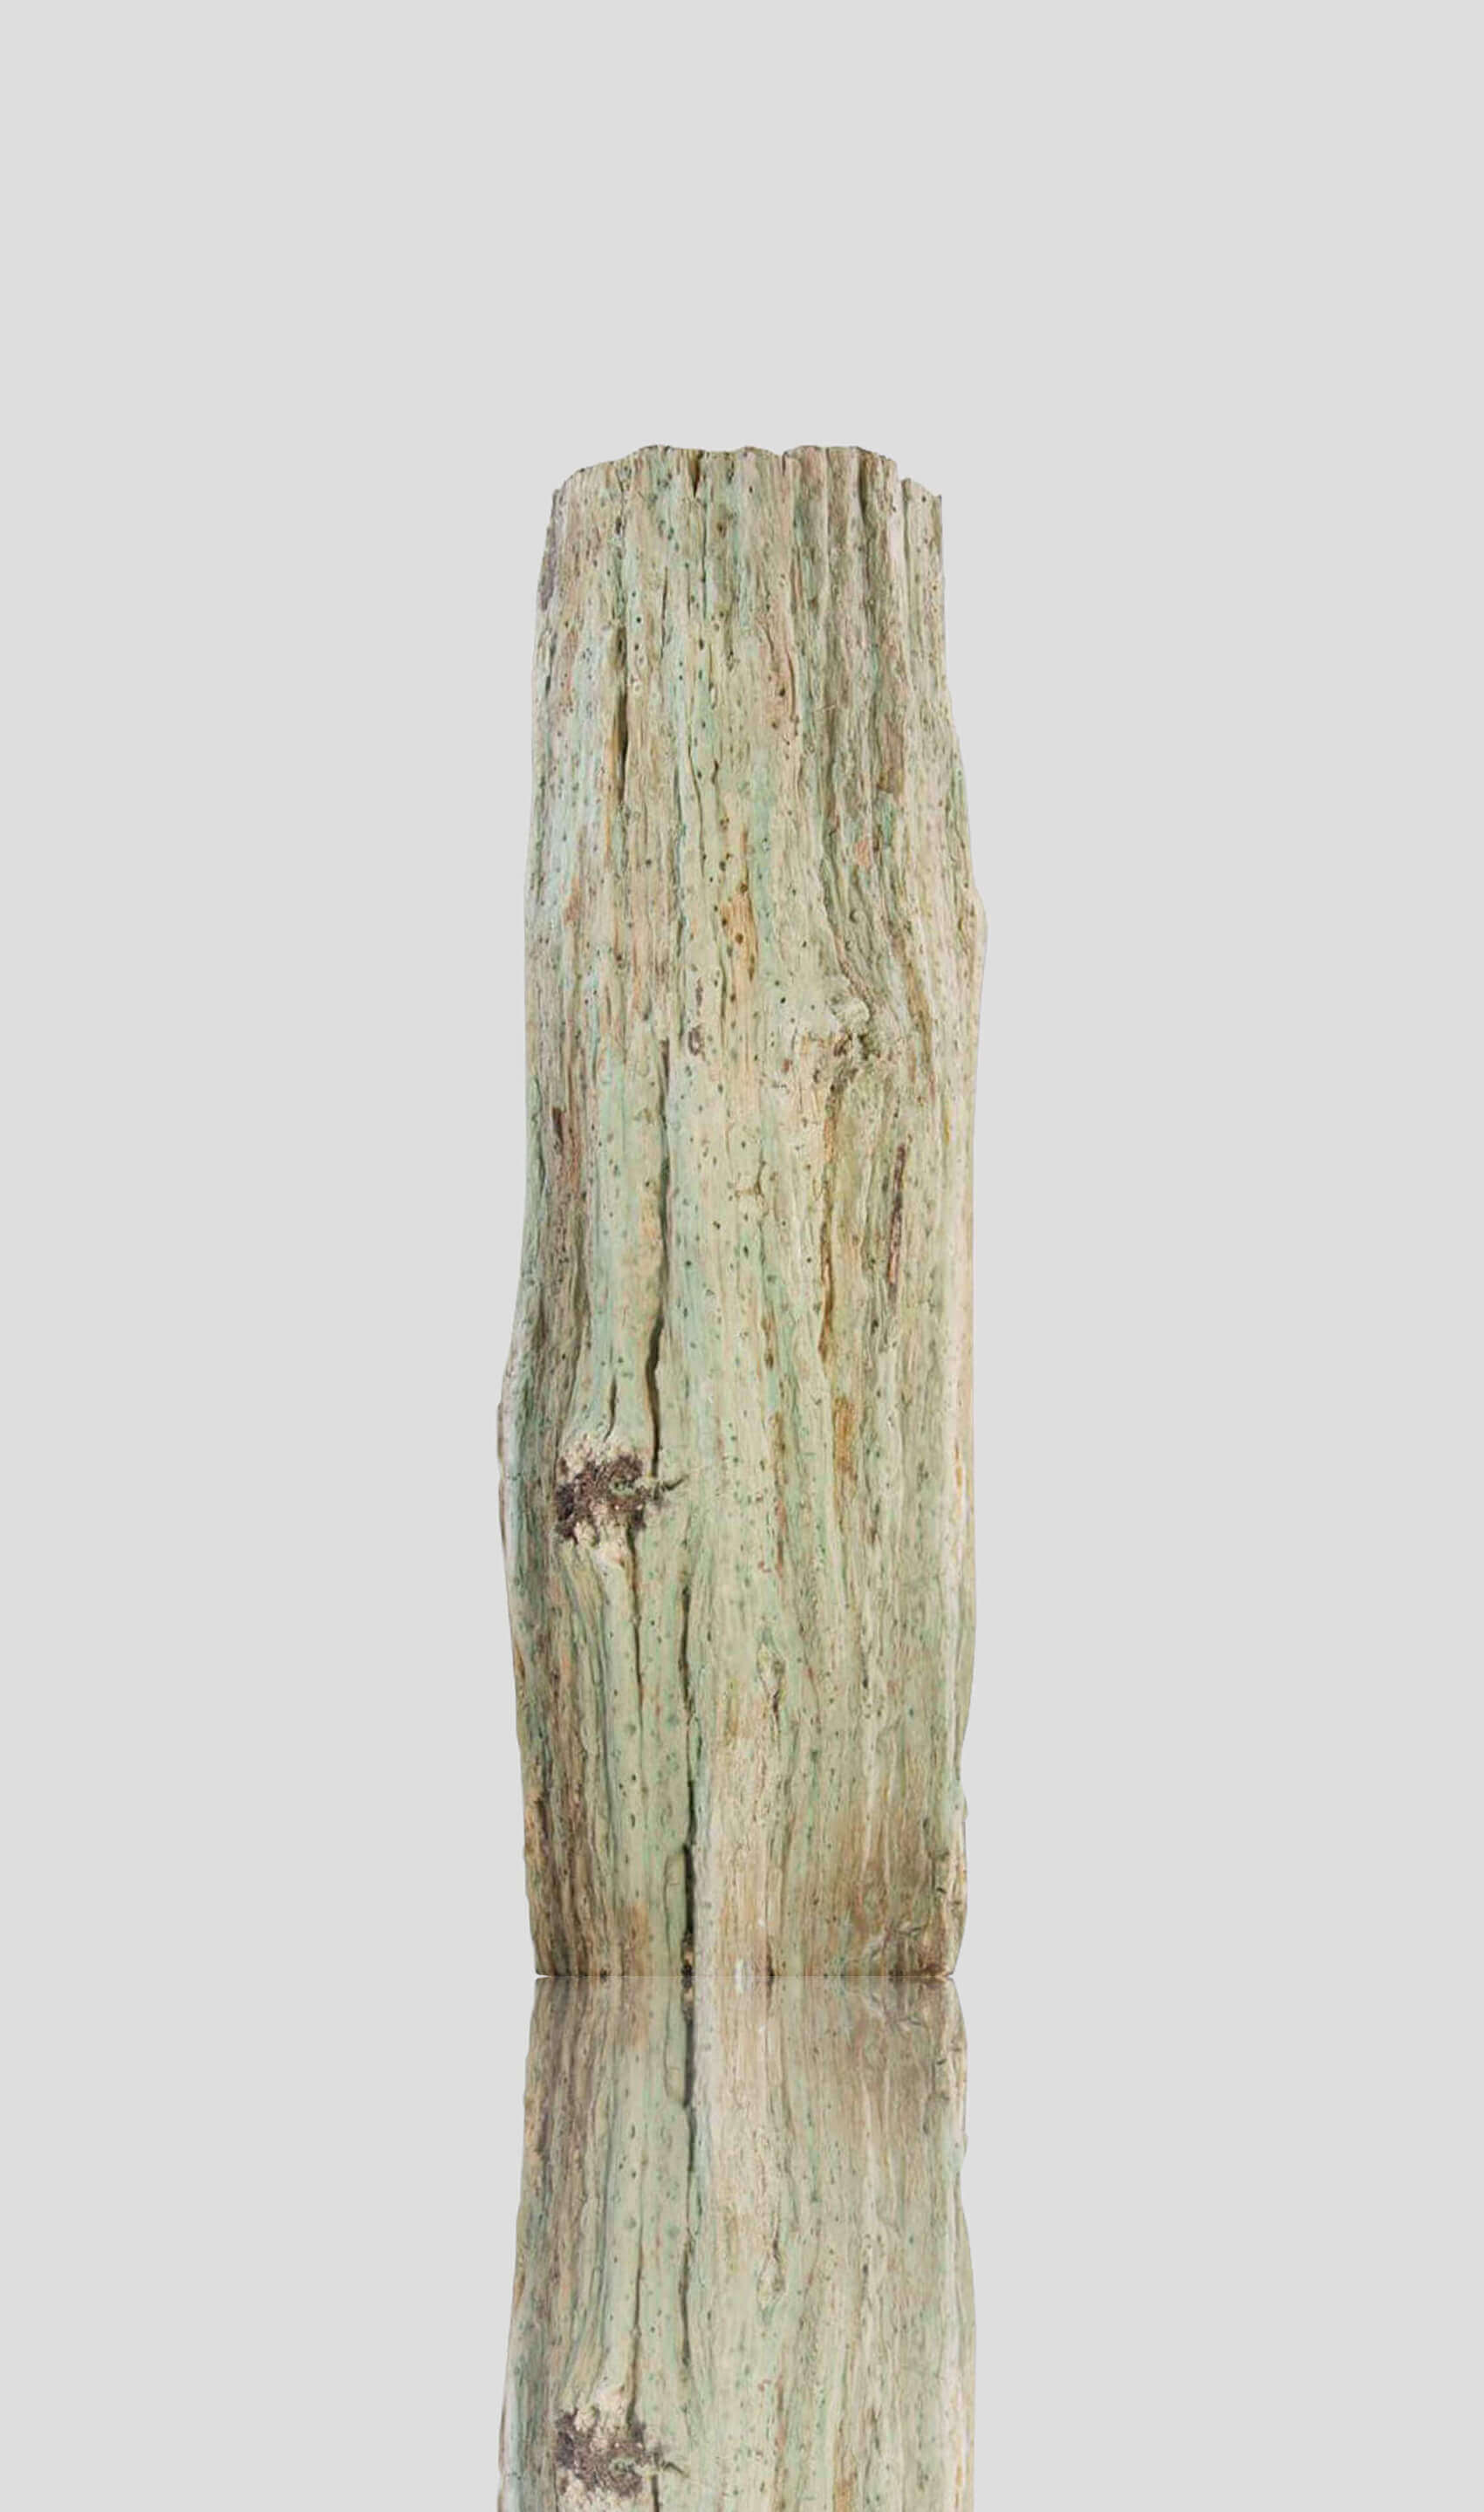 petrified tree trunk for sale of palm tree interior display 01